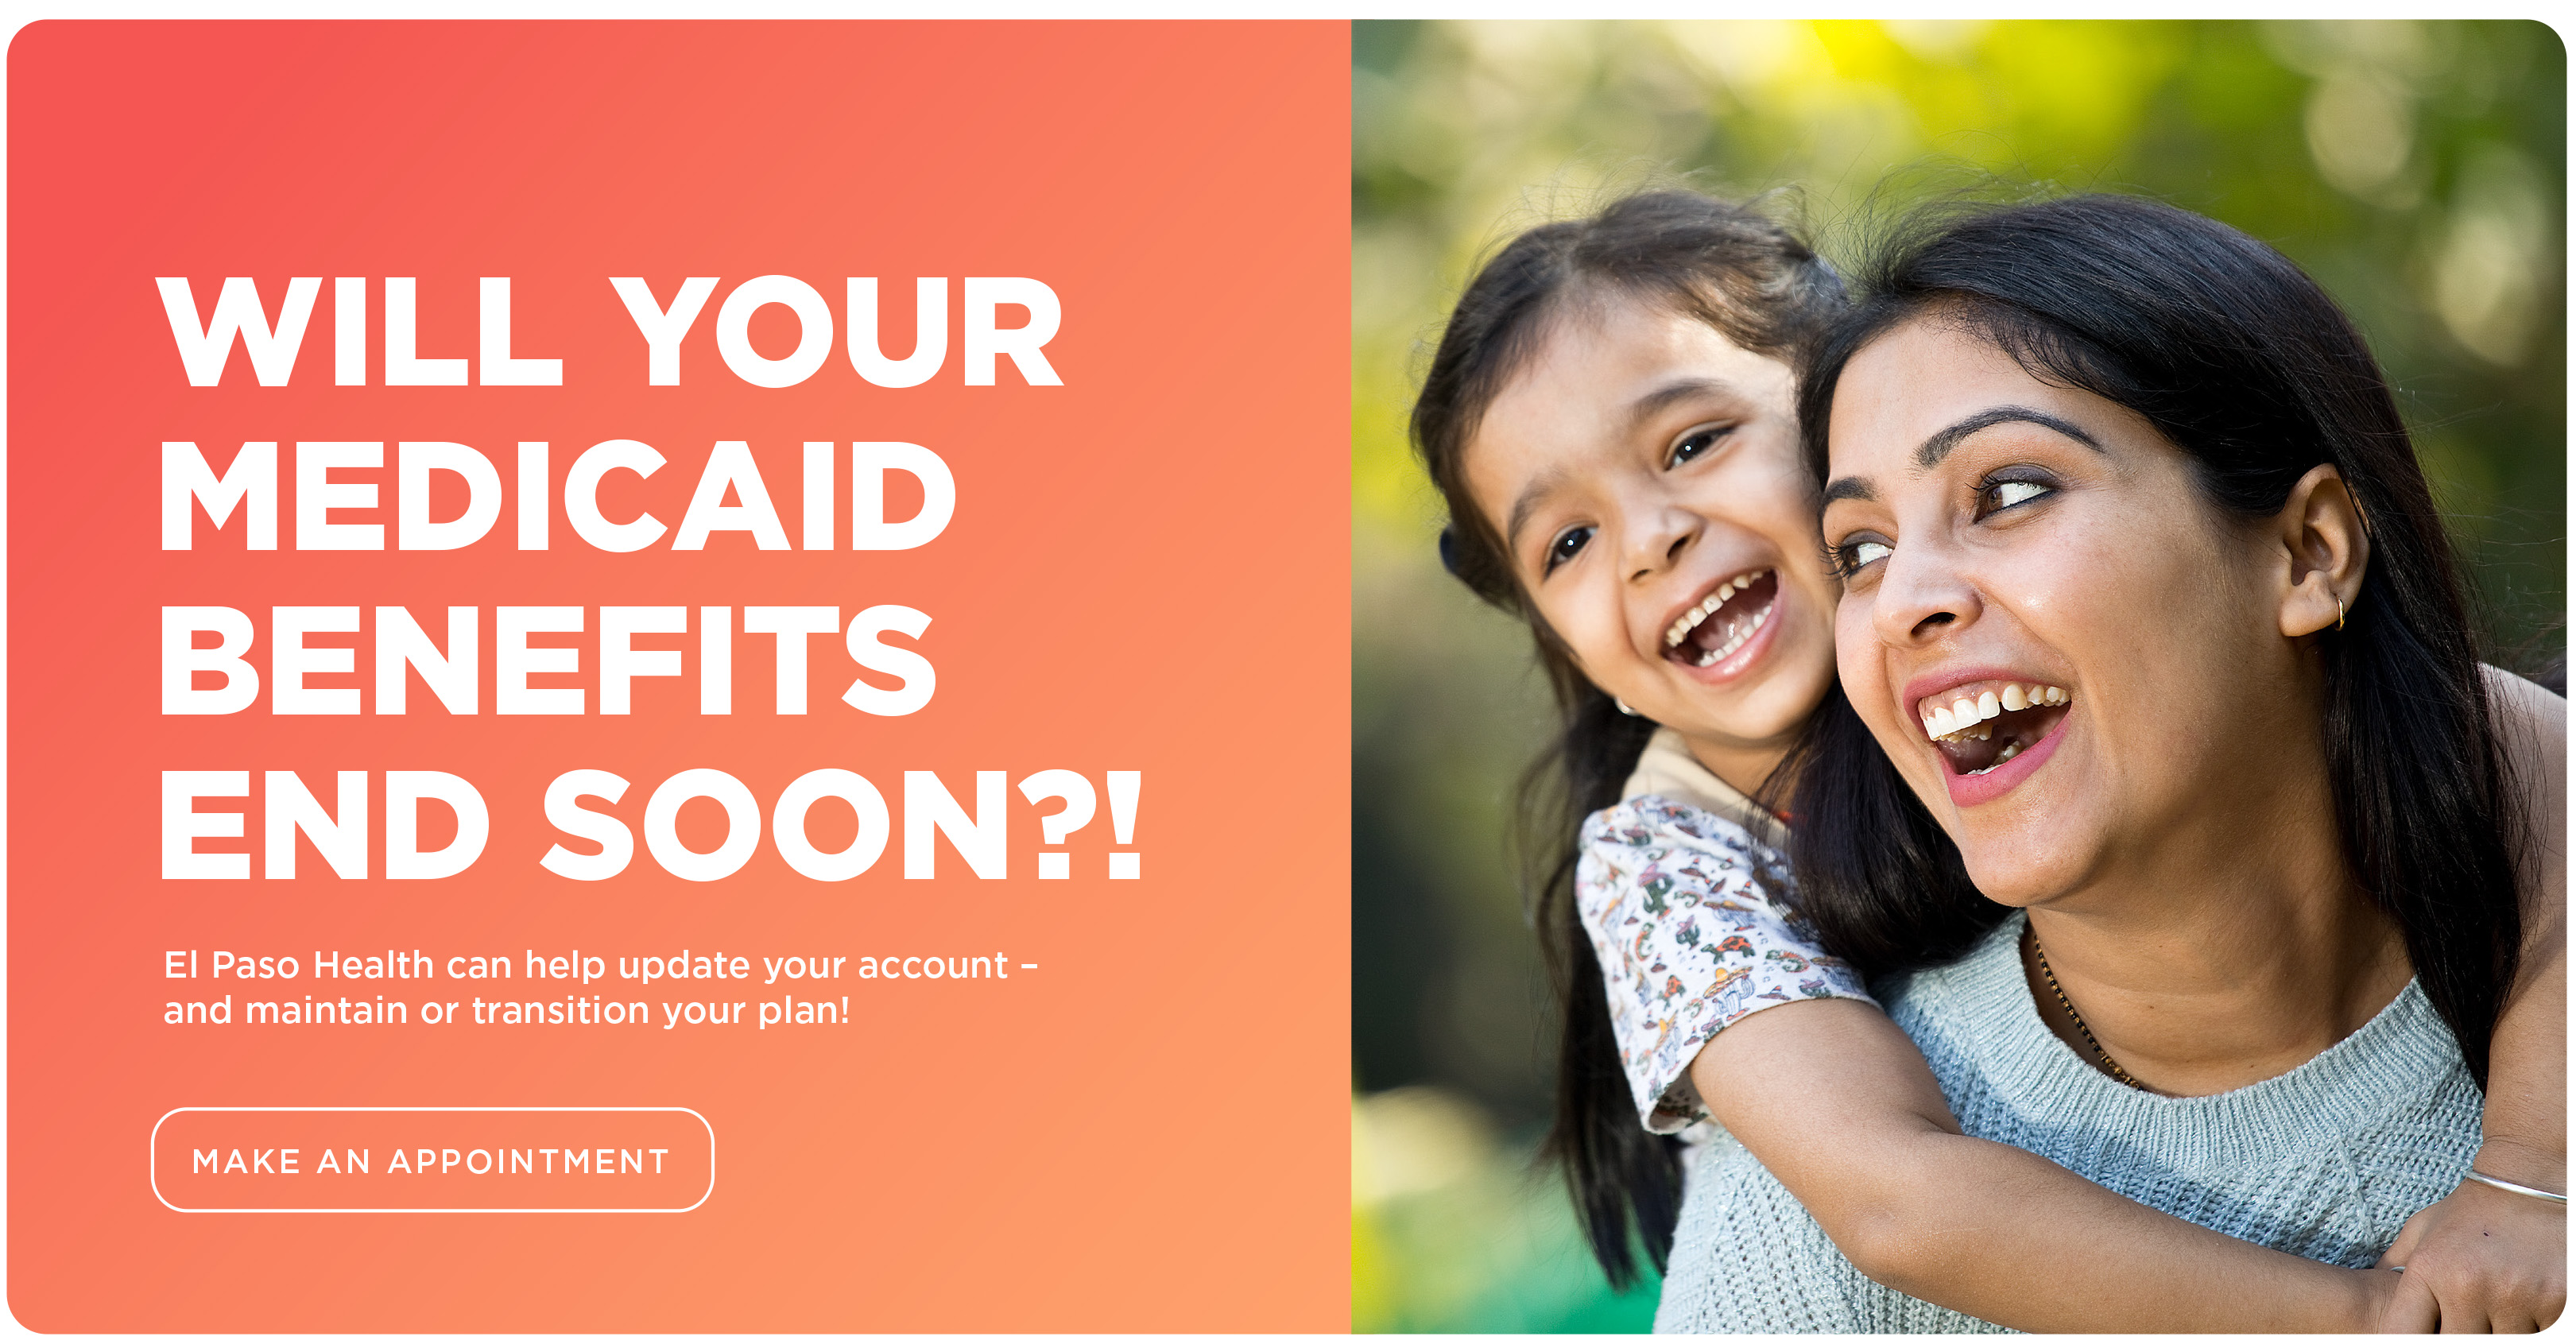 WILL YOUR MEDICAID BENEFITS END SOON?! El Paso Health can help update your account – and maintain or transition your plan! Click to make an appointment